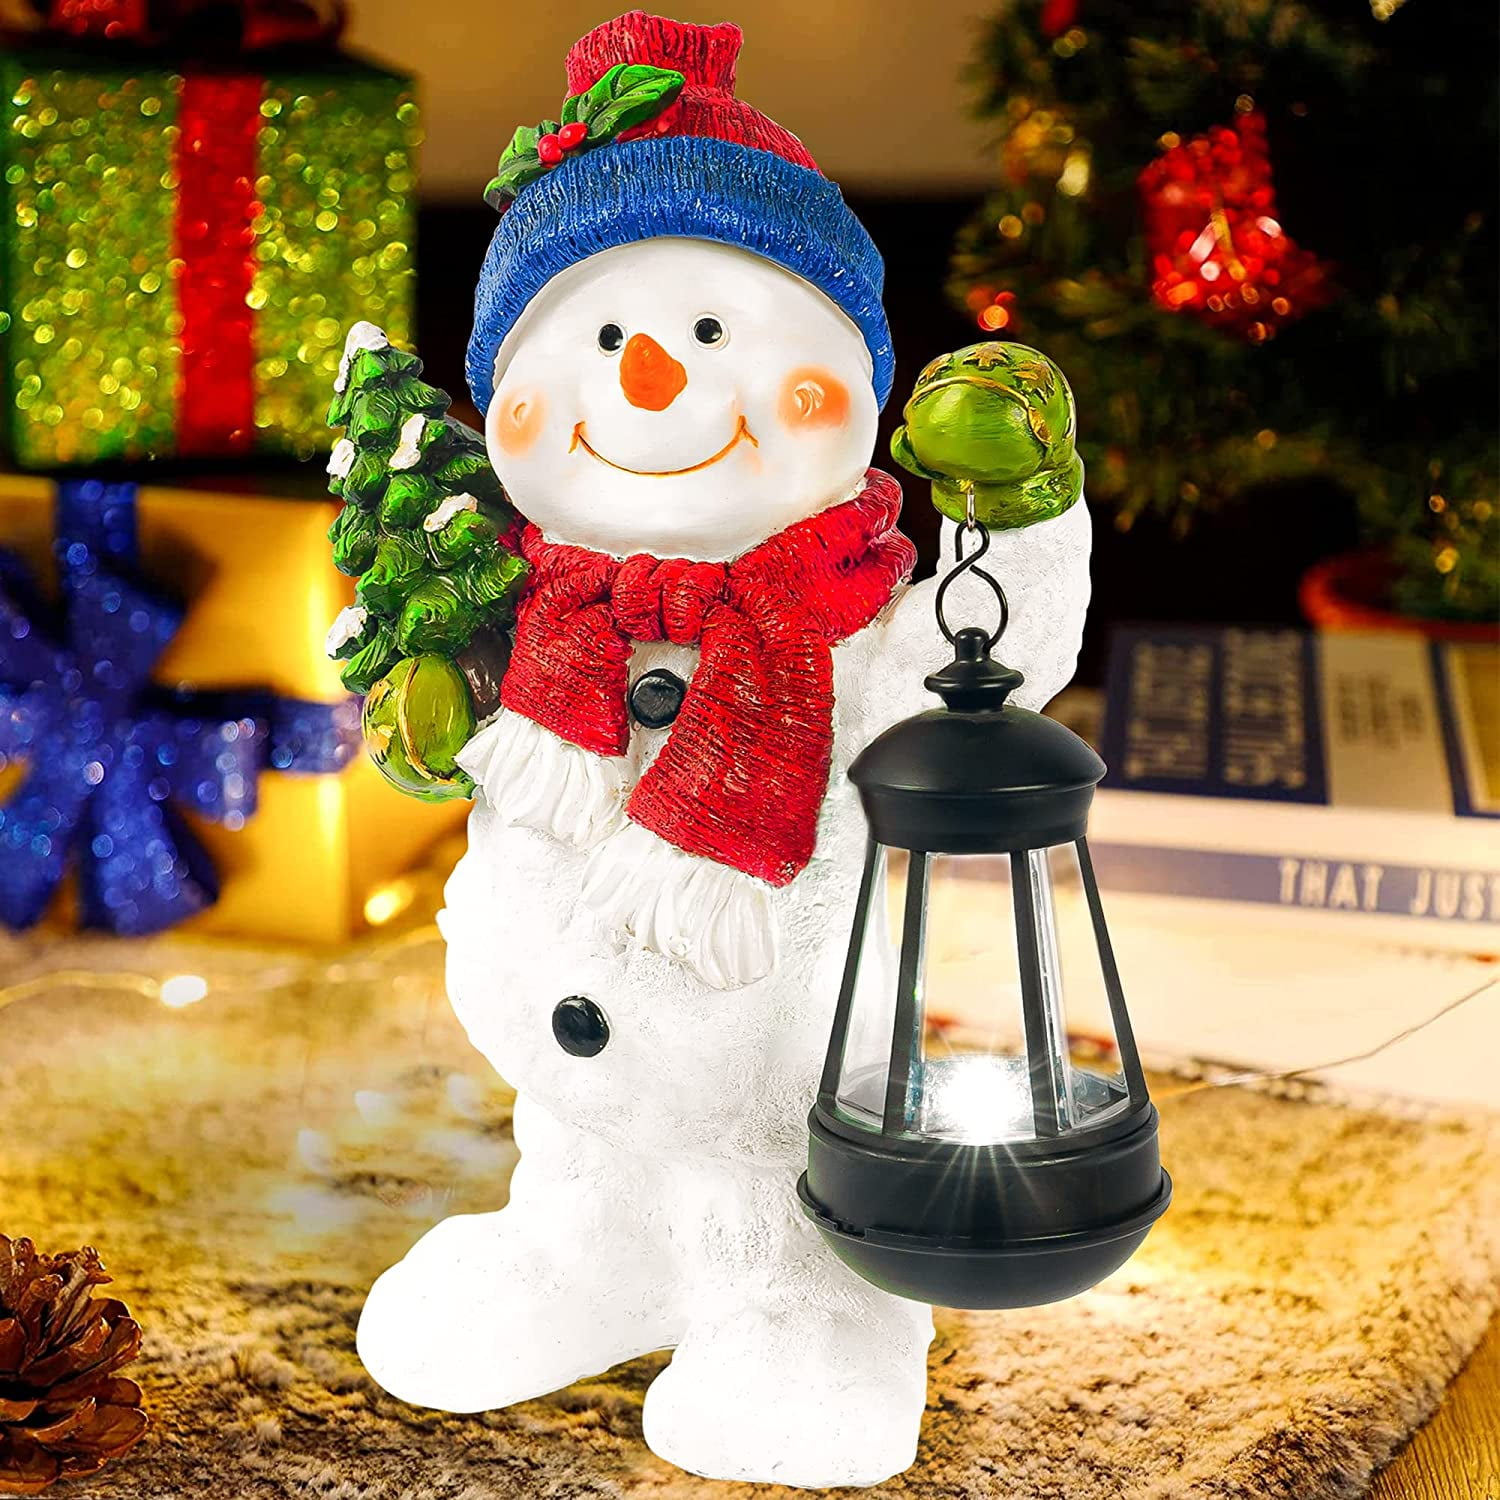 Home Design Resin Holiday Snowman Ornaments 11 Different Holidays July 4 Spring 